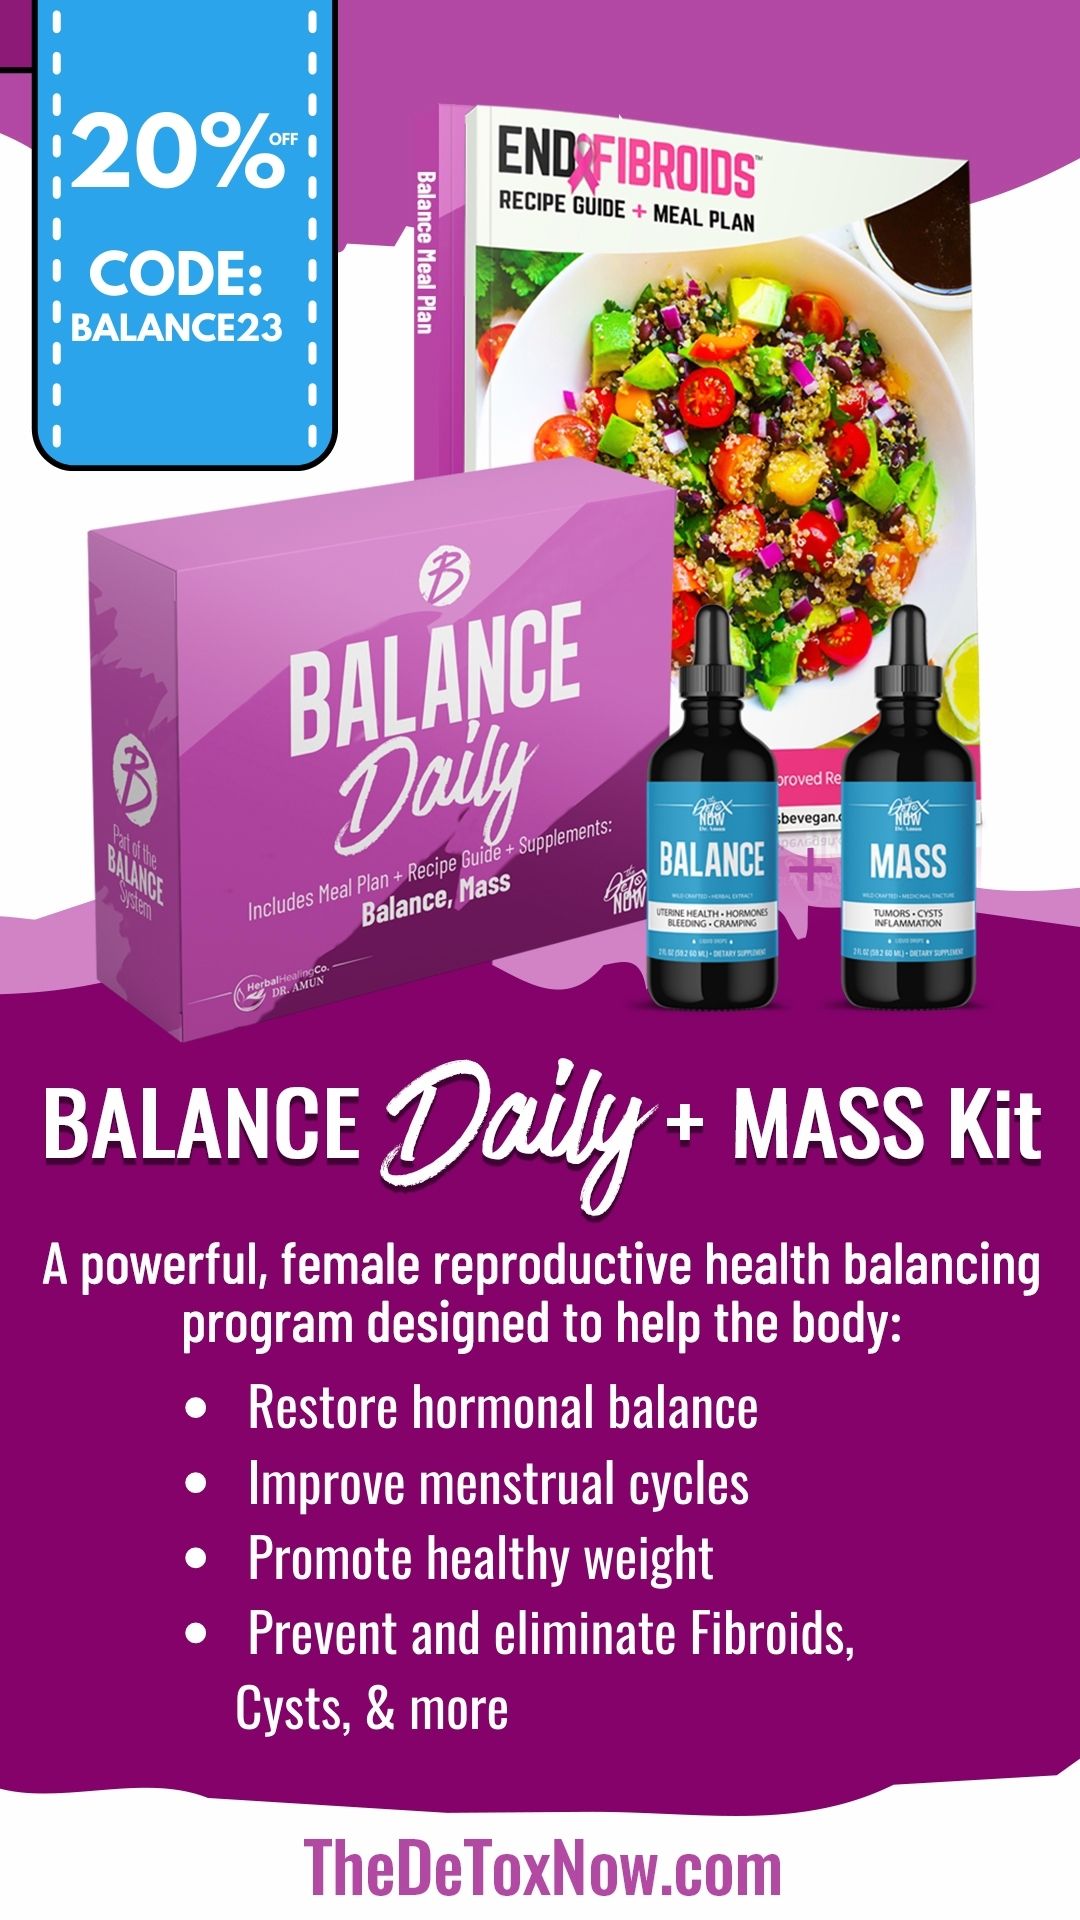 UFIBROIDS RECIPE GUIDE MEAL pLAN hw % i plan* Gl FCL IS i ol @ BALANCE Zly MASS Kit A powerful, female reproductive health balancing program designed to help the body: e Restore hormonal balance mprove menstrual cycles Promote healthy weight e Prevent and eliminate Fibroids, R TheDeToxNow.com 